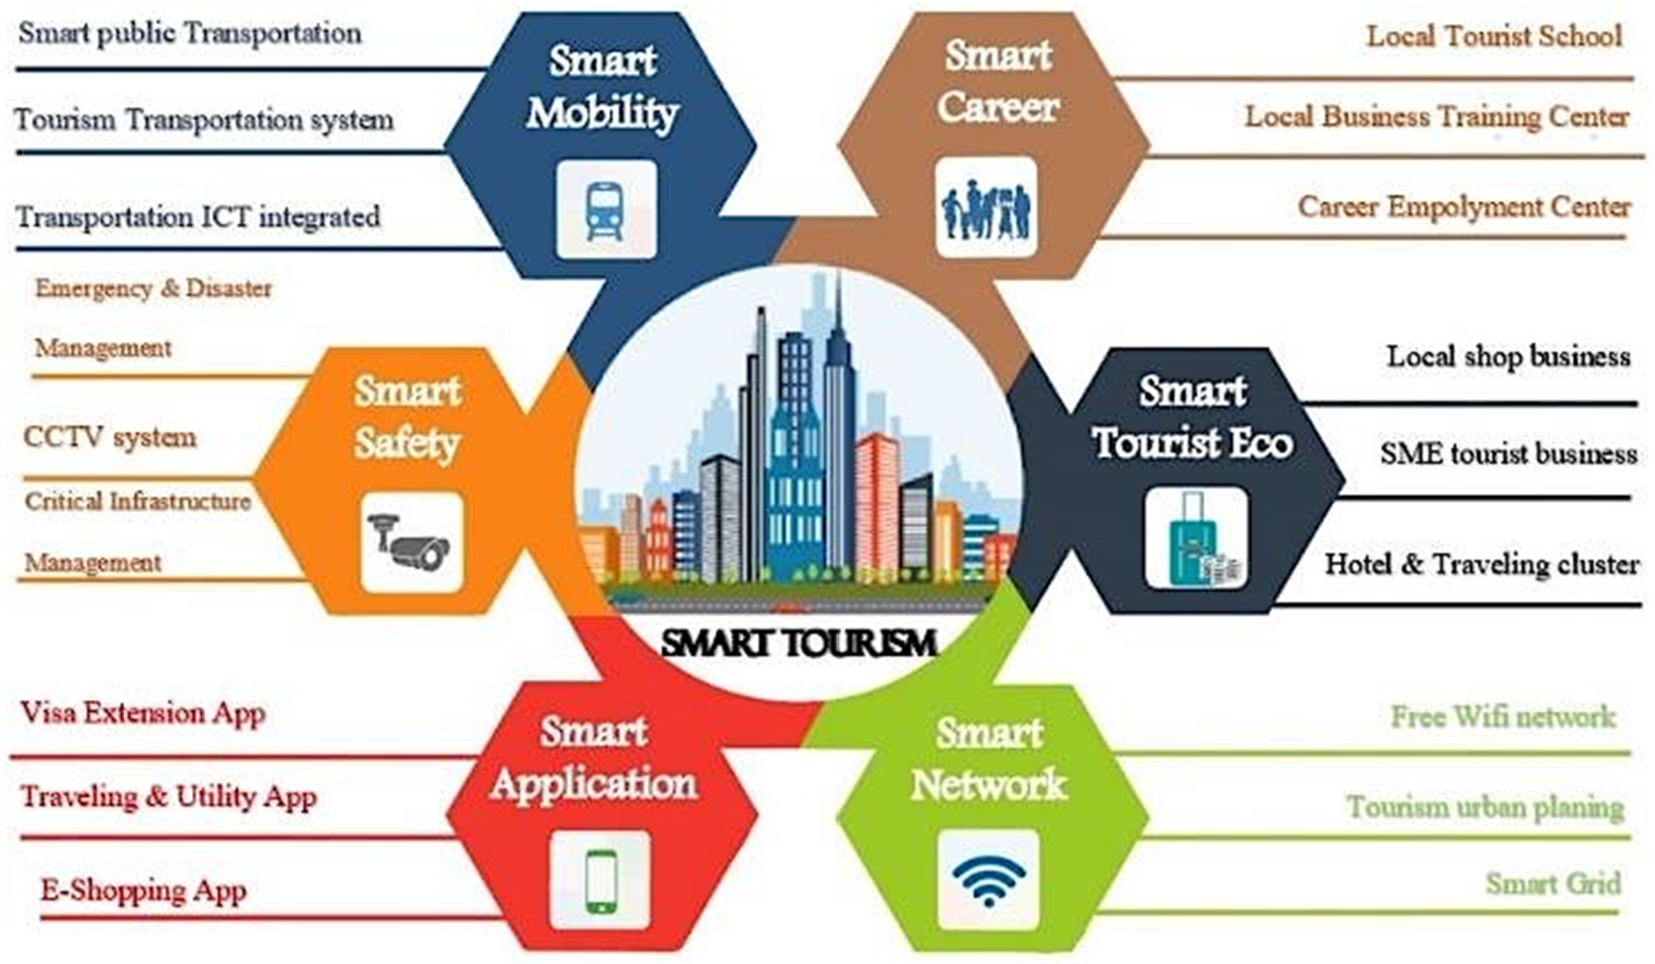 Smart tourism application model in the smart city [47].